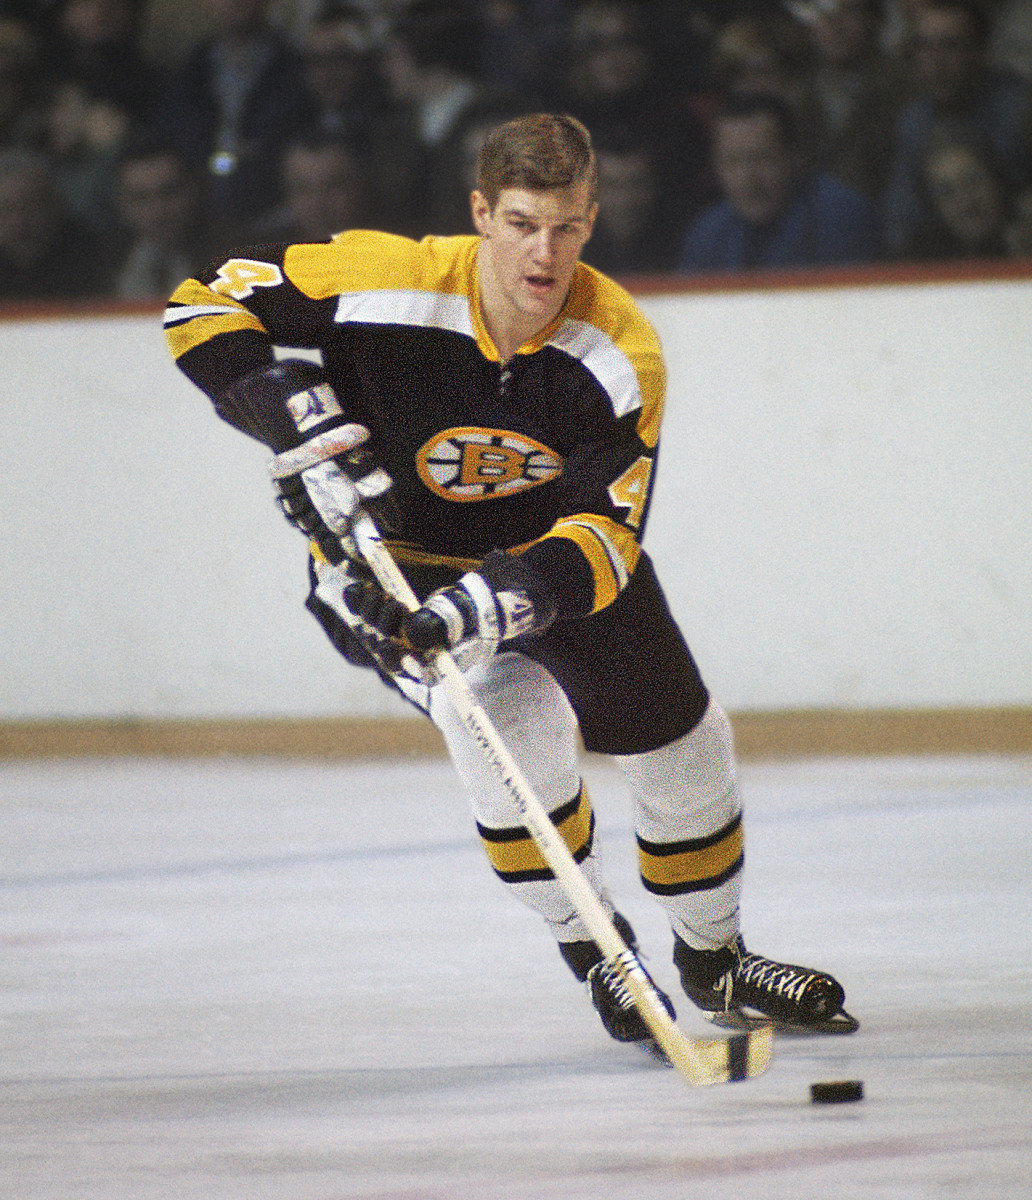 Makar may not be an exact replica of the original, but Gretzky labels him a “new-era Bobby Orr.”